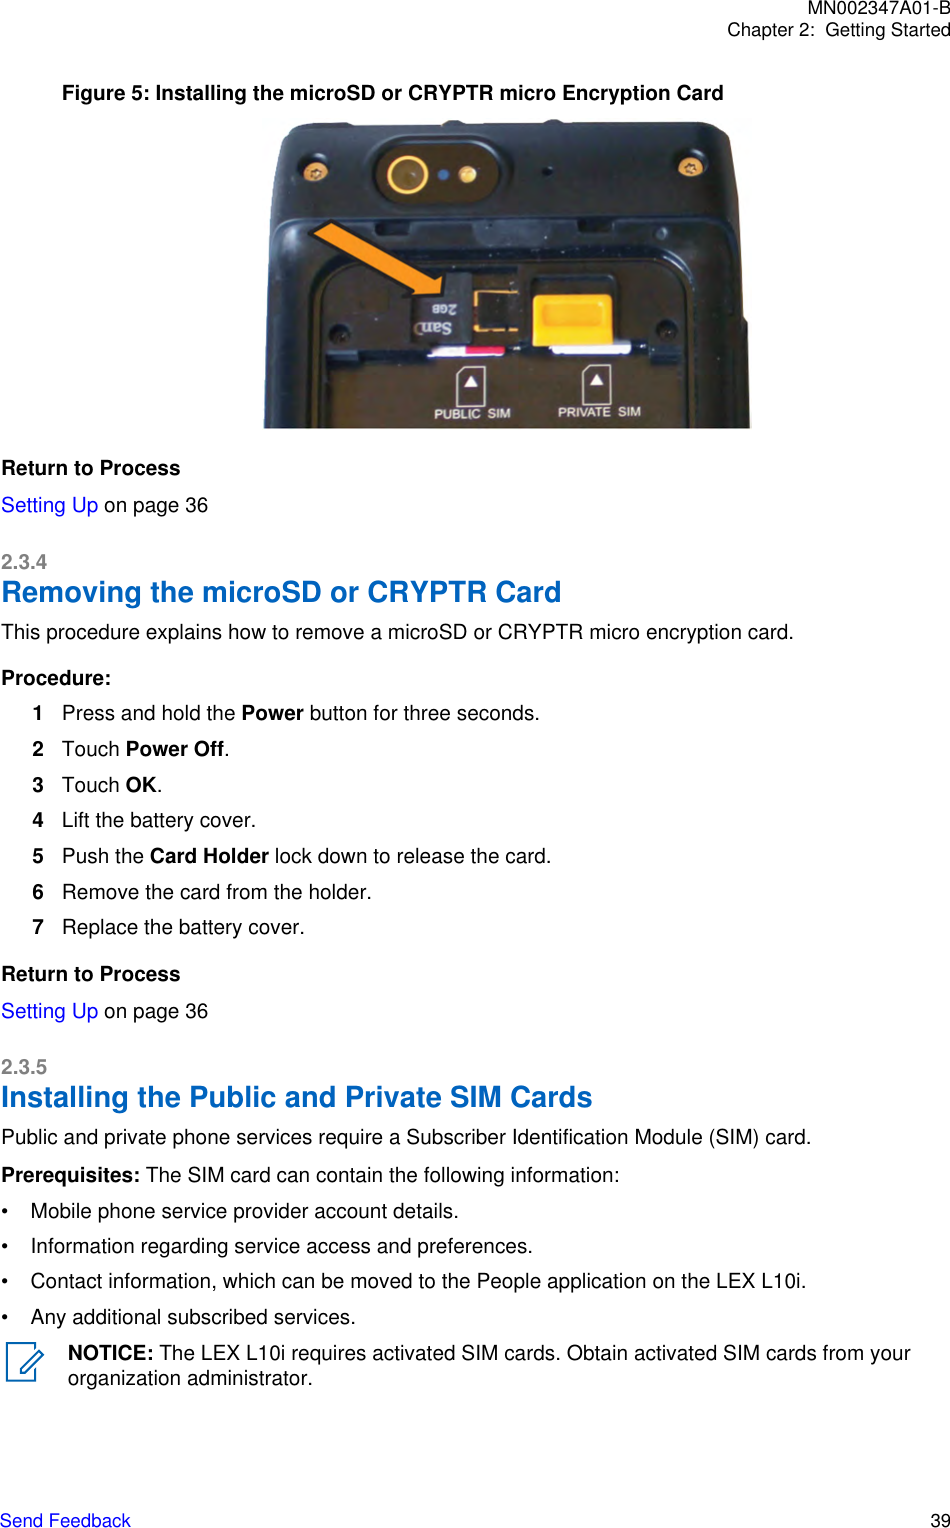 Figure 5: Installing the microSD or CRYPTR micro Encryption CardReturn to ProcessSetting Up on page 362.3.4Removing the microSD or CRYPTR CardThis procedure explains how to remove a microSD or CRYPTR micro encryption card.Procedure:1Press and hold the Power button for three seconds.2Touch Power Off.3Touch OK.4Lift the battery cover.5Push the Card Holder lock down to release the card.6Remove the card from the holder.7Replace the battery cover.Return to ProcessSetting Up on page 362.3.5Installing the Public and Private SIM CardsPublic and private phone services require a Subscriber Identification Module (SIM) card.Prerequisites: The SIM card can contain the following information:• Mobile phone service provider account details.• Information regarding service access and preferences.• Contact information, which can be moved to the People application on the LEX L10i.• Any additional subscribed services.NOTICE: The LEX L10i requires activated SIM cards. Obtain activated SIM cards from yourorganization administrator.MN002347A01-BChapter 2:  Getting StartedSend Feedback   39